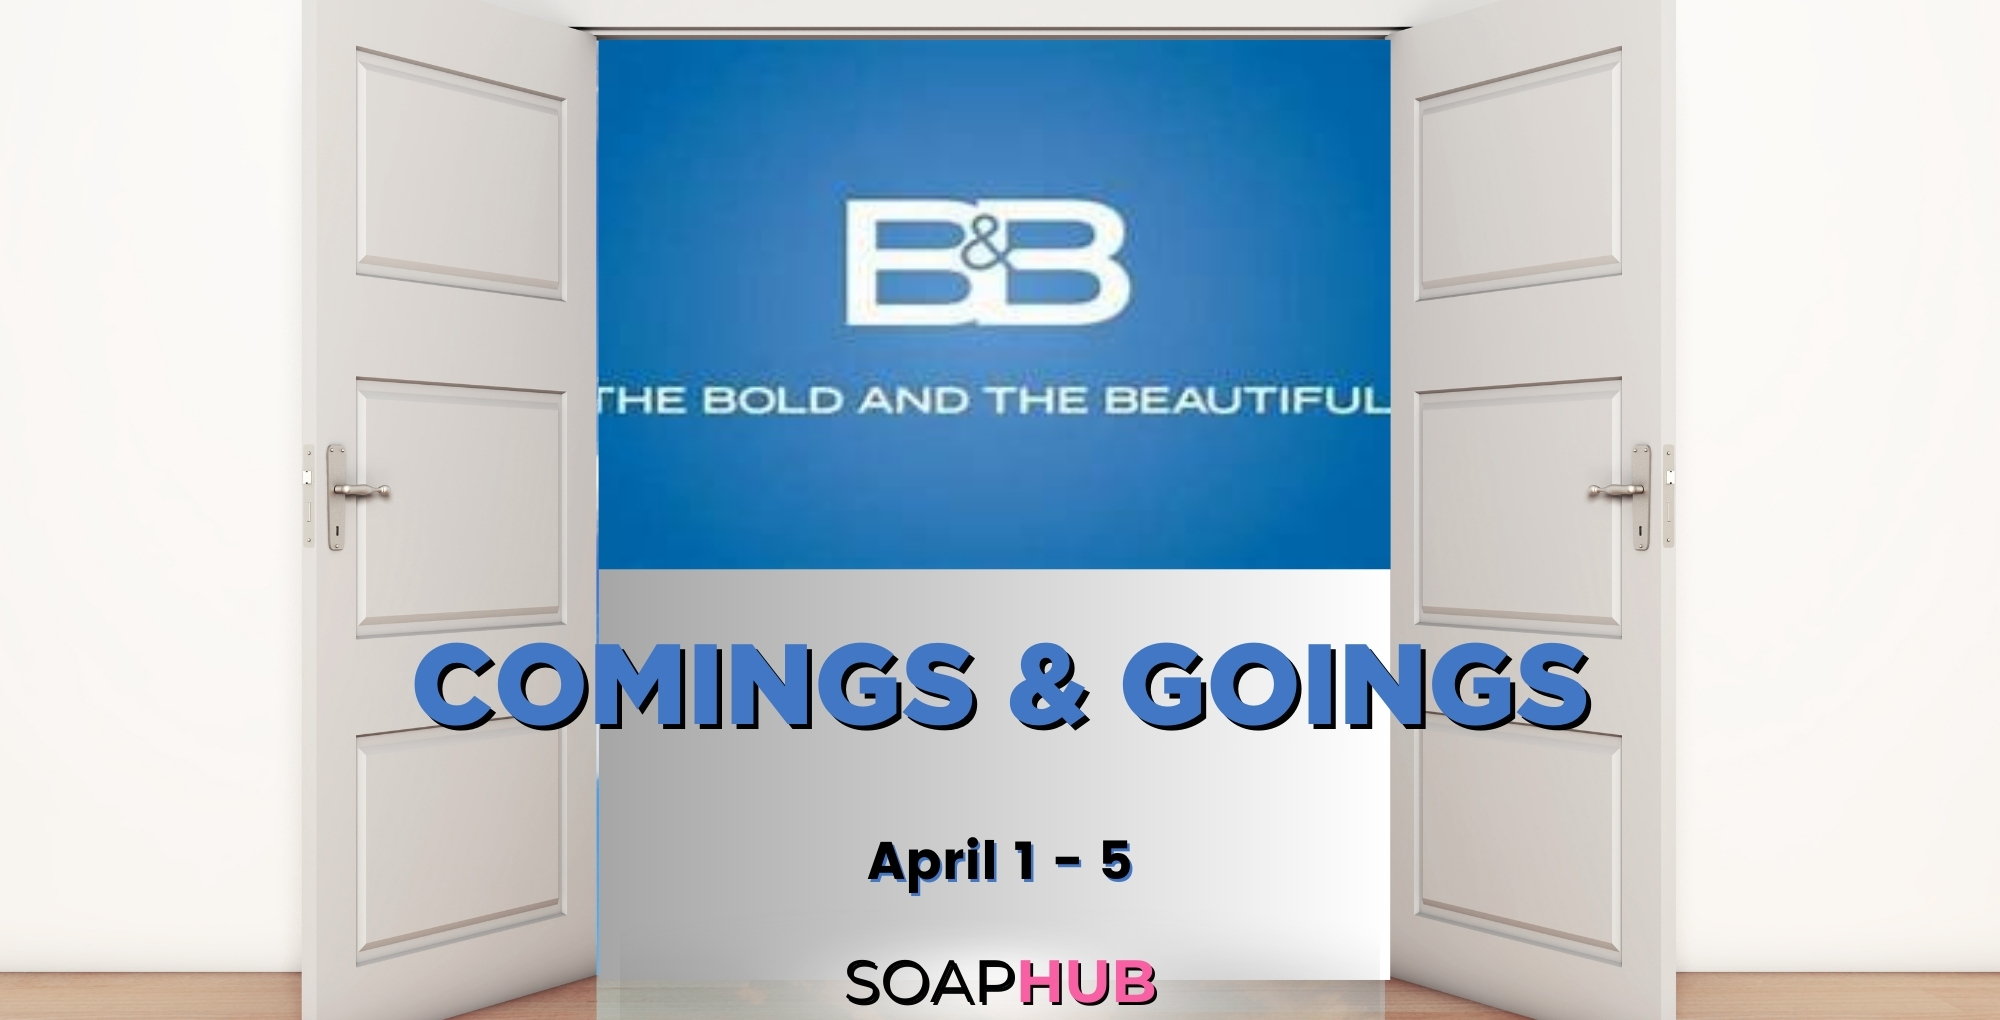 The Bold and the Beautiful comings and goings for the week of April 1 - 5 with the Soap Hub logo across the bottom.